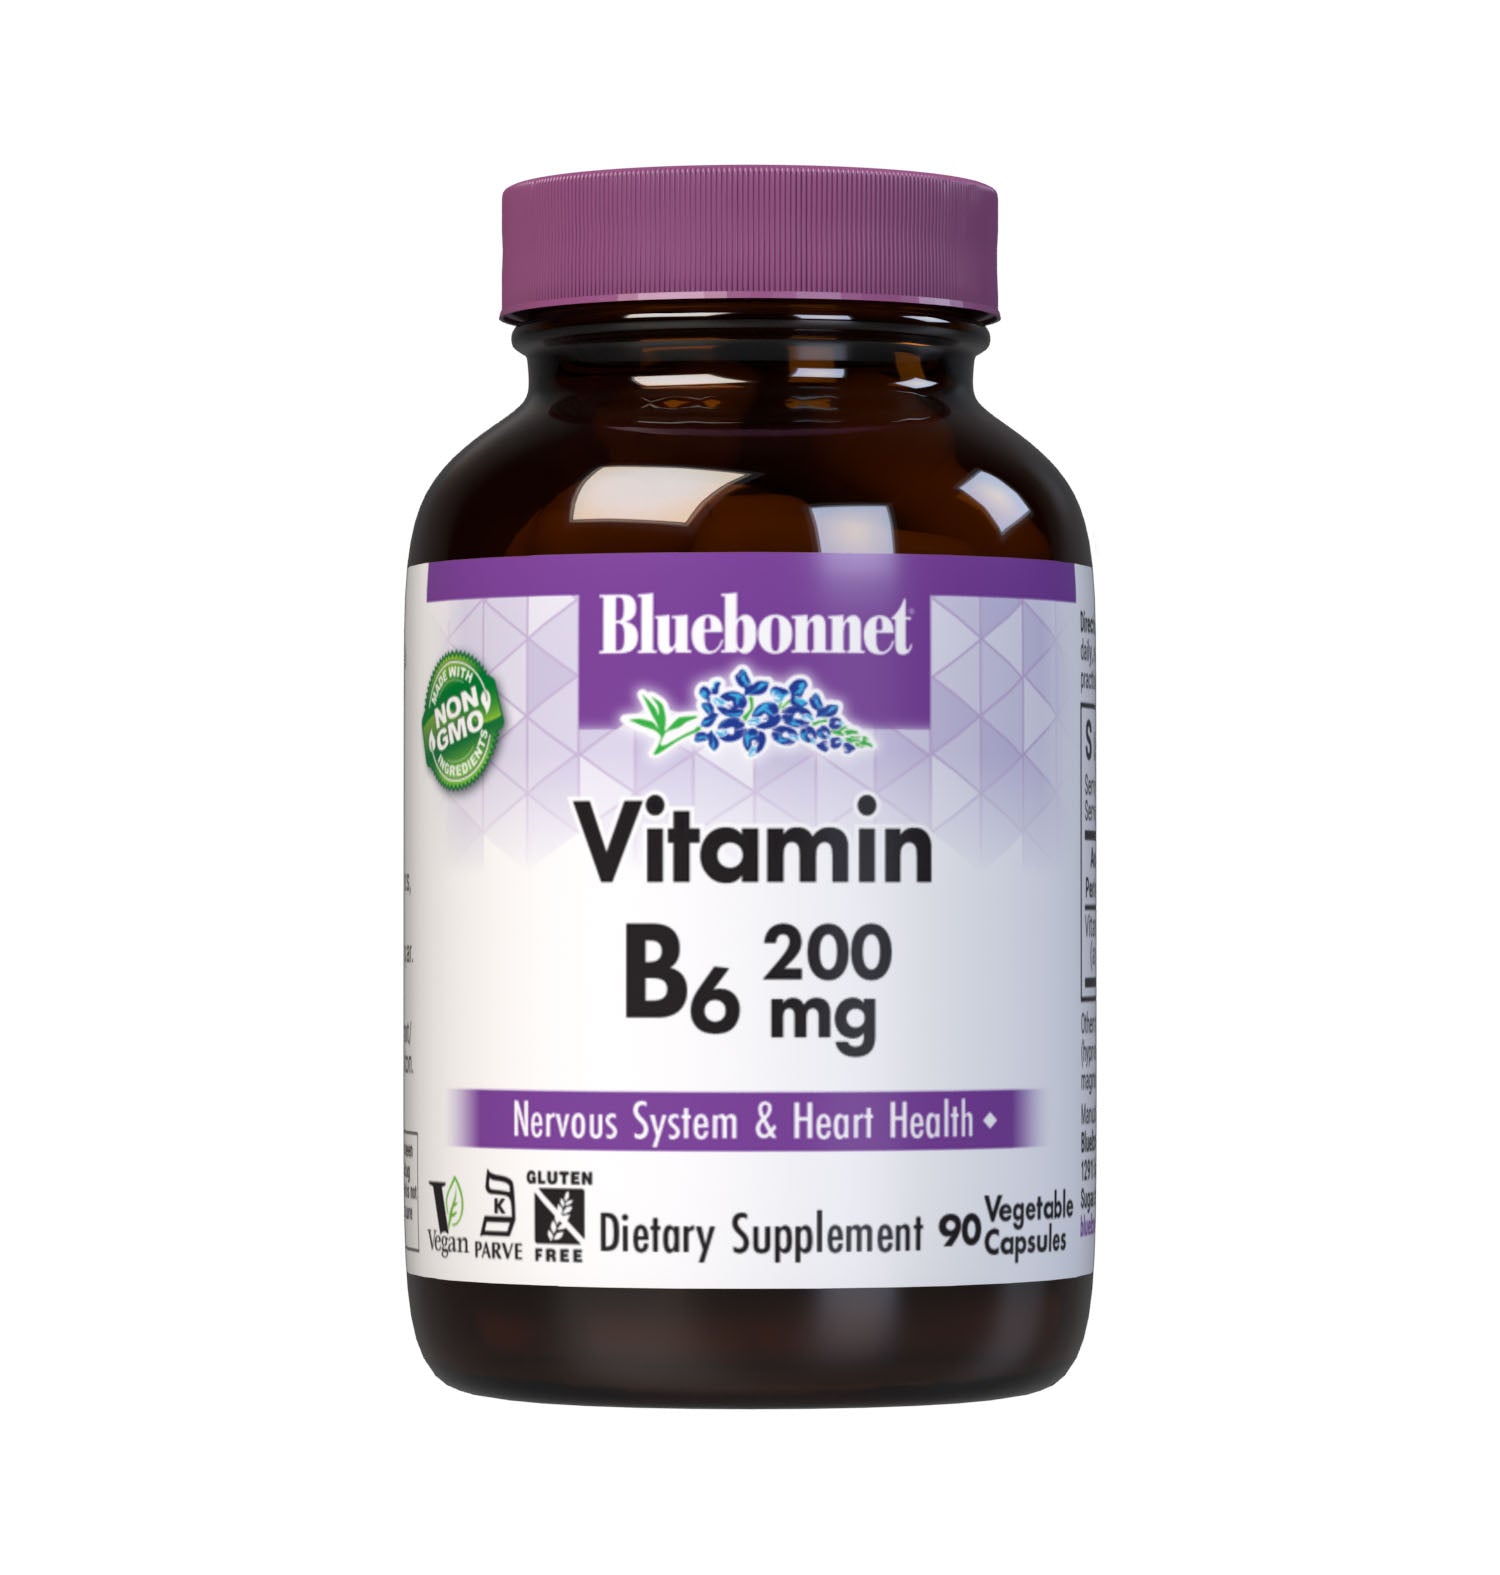 Bluebonnet’s Vitamin B6 200 mg Vegetable Capsules are formulated with crystalline vitamin B6 (pyridoxine HCI) which may support the nervous system, as well as immune and cardiovascular health. #size_90 count